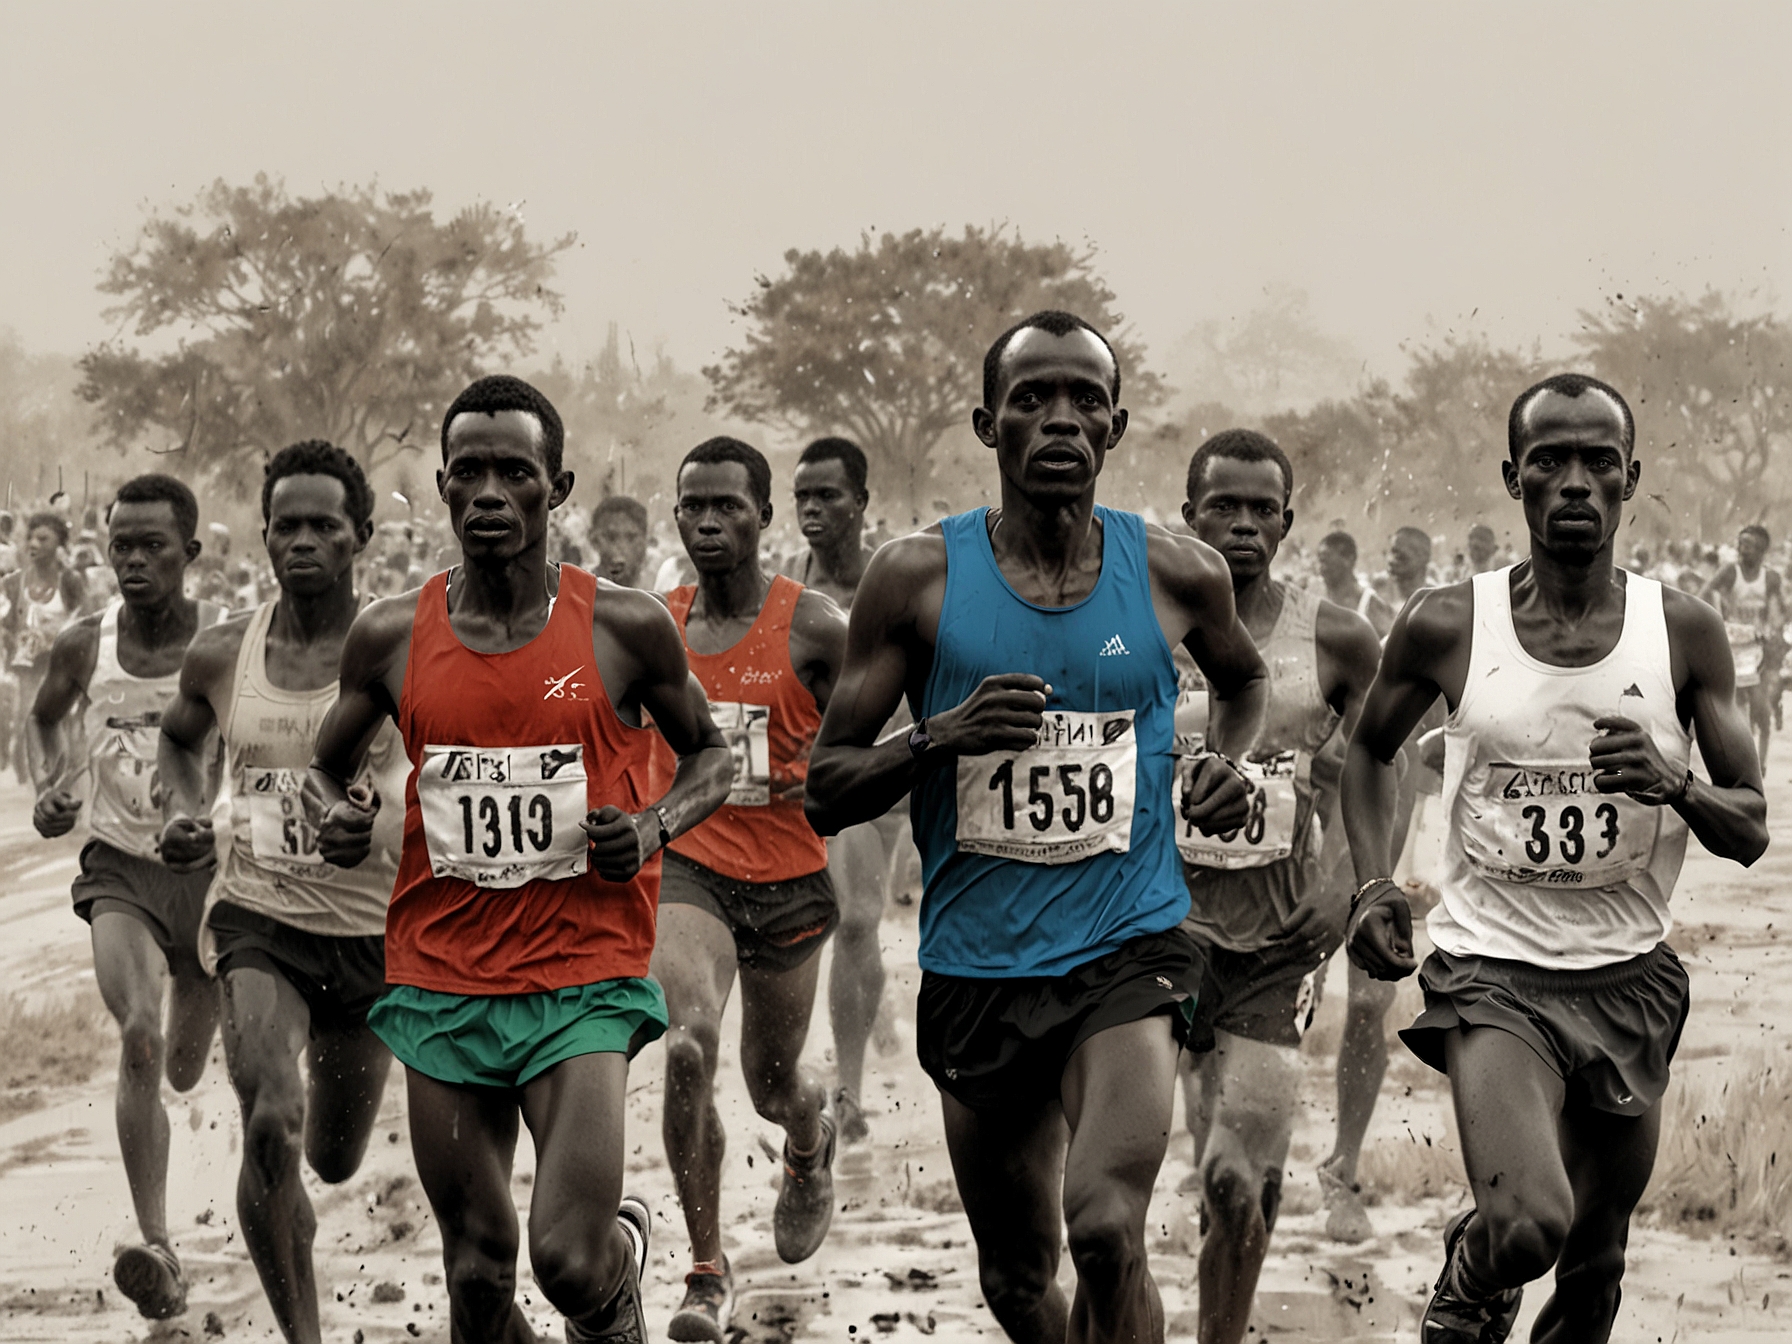 Runners from East African countries, particularly Kenya and Ethiopia, showcase their dominance in a 50-km ultra-marathon, highlighting their remarkable endurance and speed.